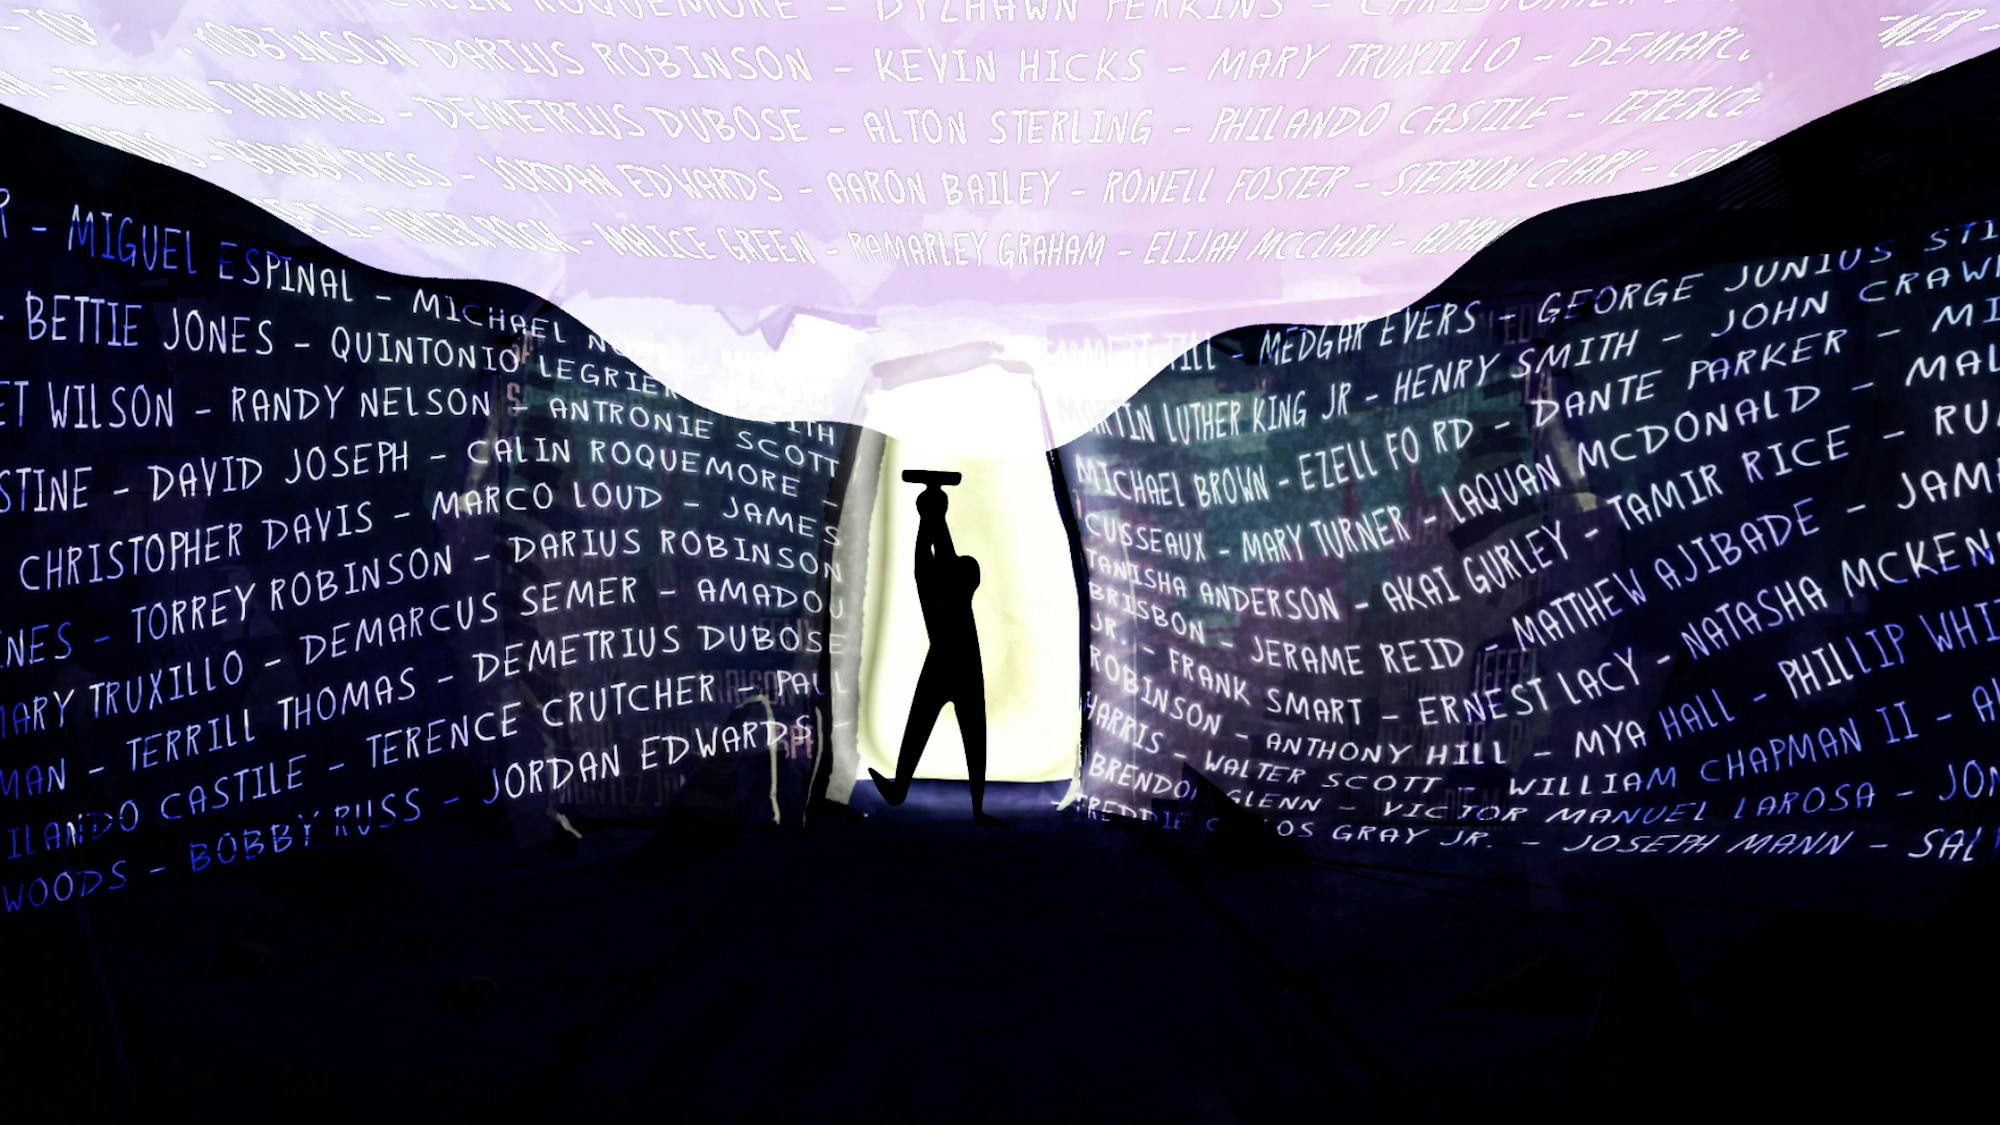 A still from *Cops and Robbers* shows animation by Isaiah Shaw. The illustration is done in purples and whites, and features the names of Black lives lost, victims of systemic racism.